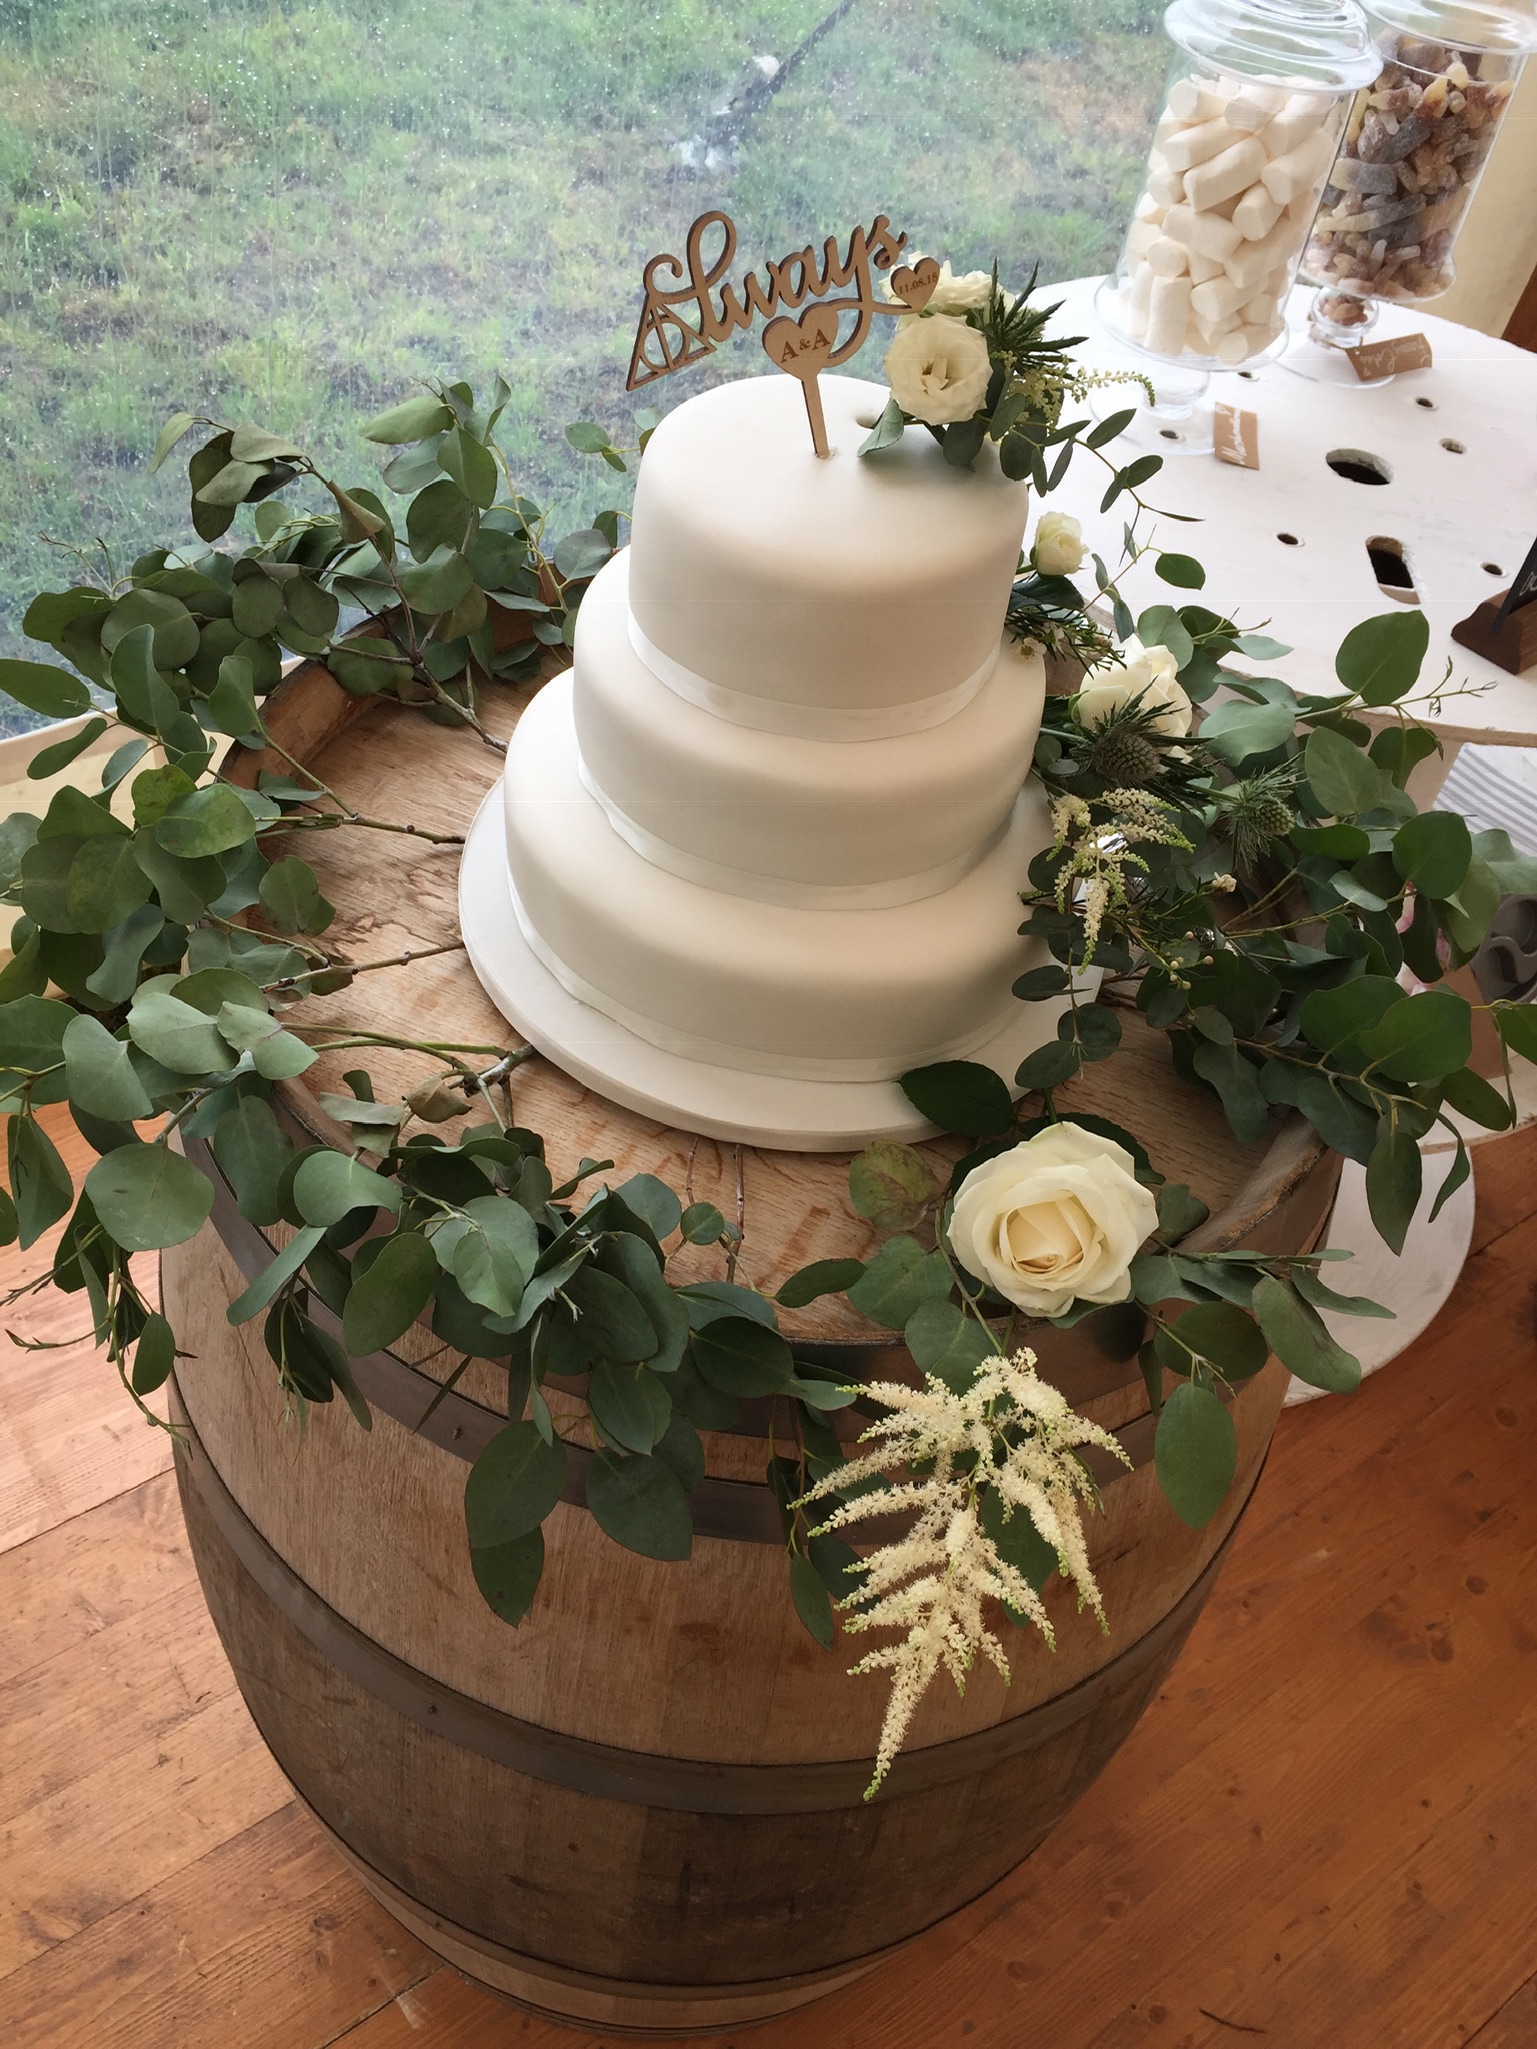 Exeter Wedding Caterers